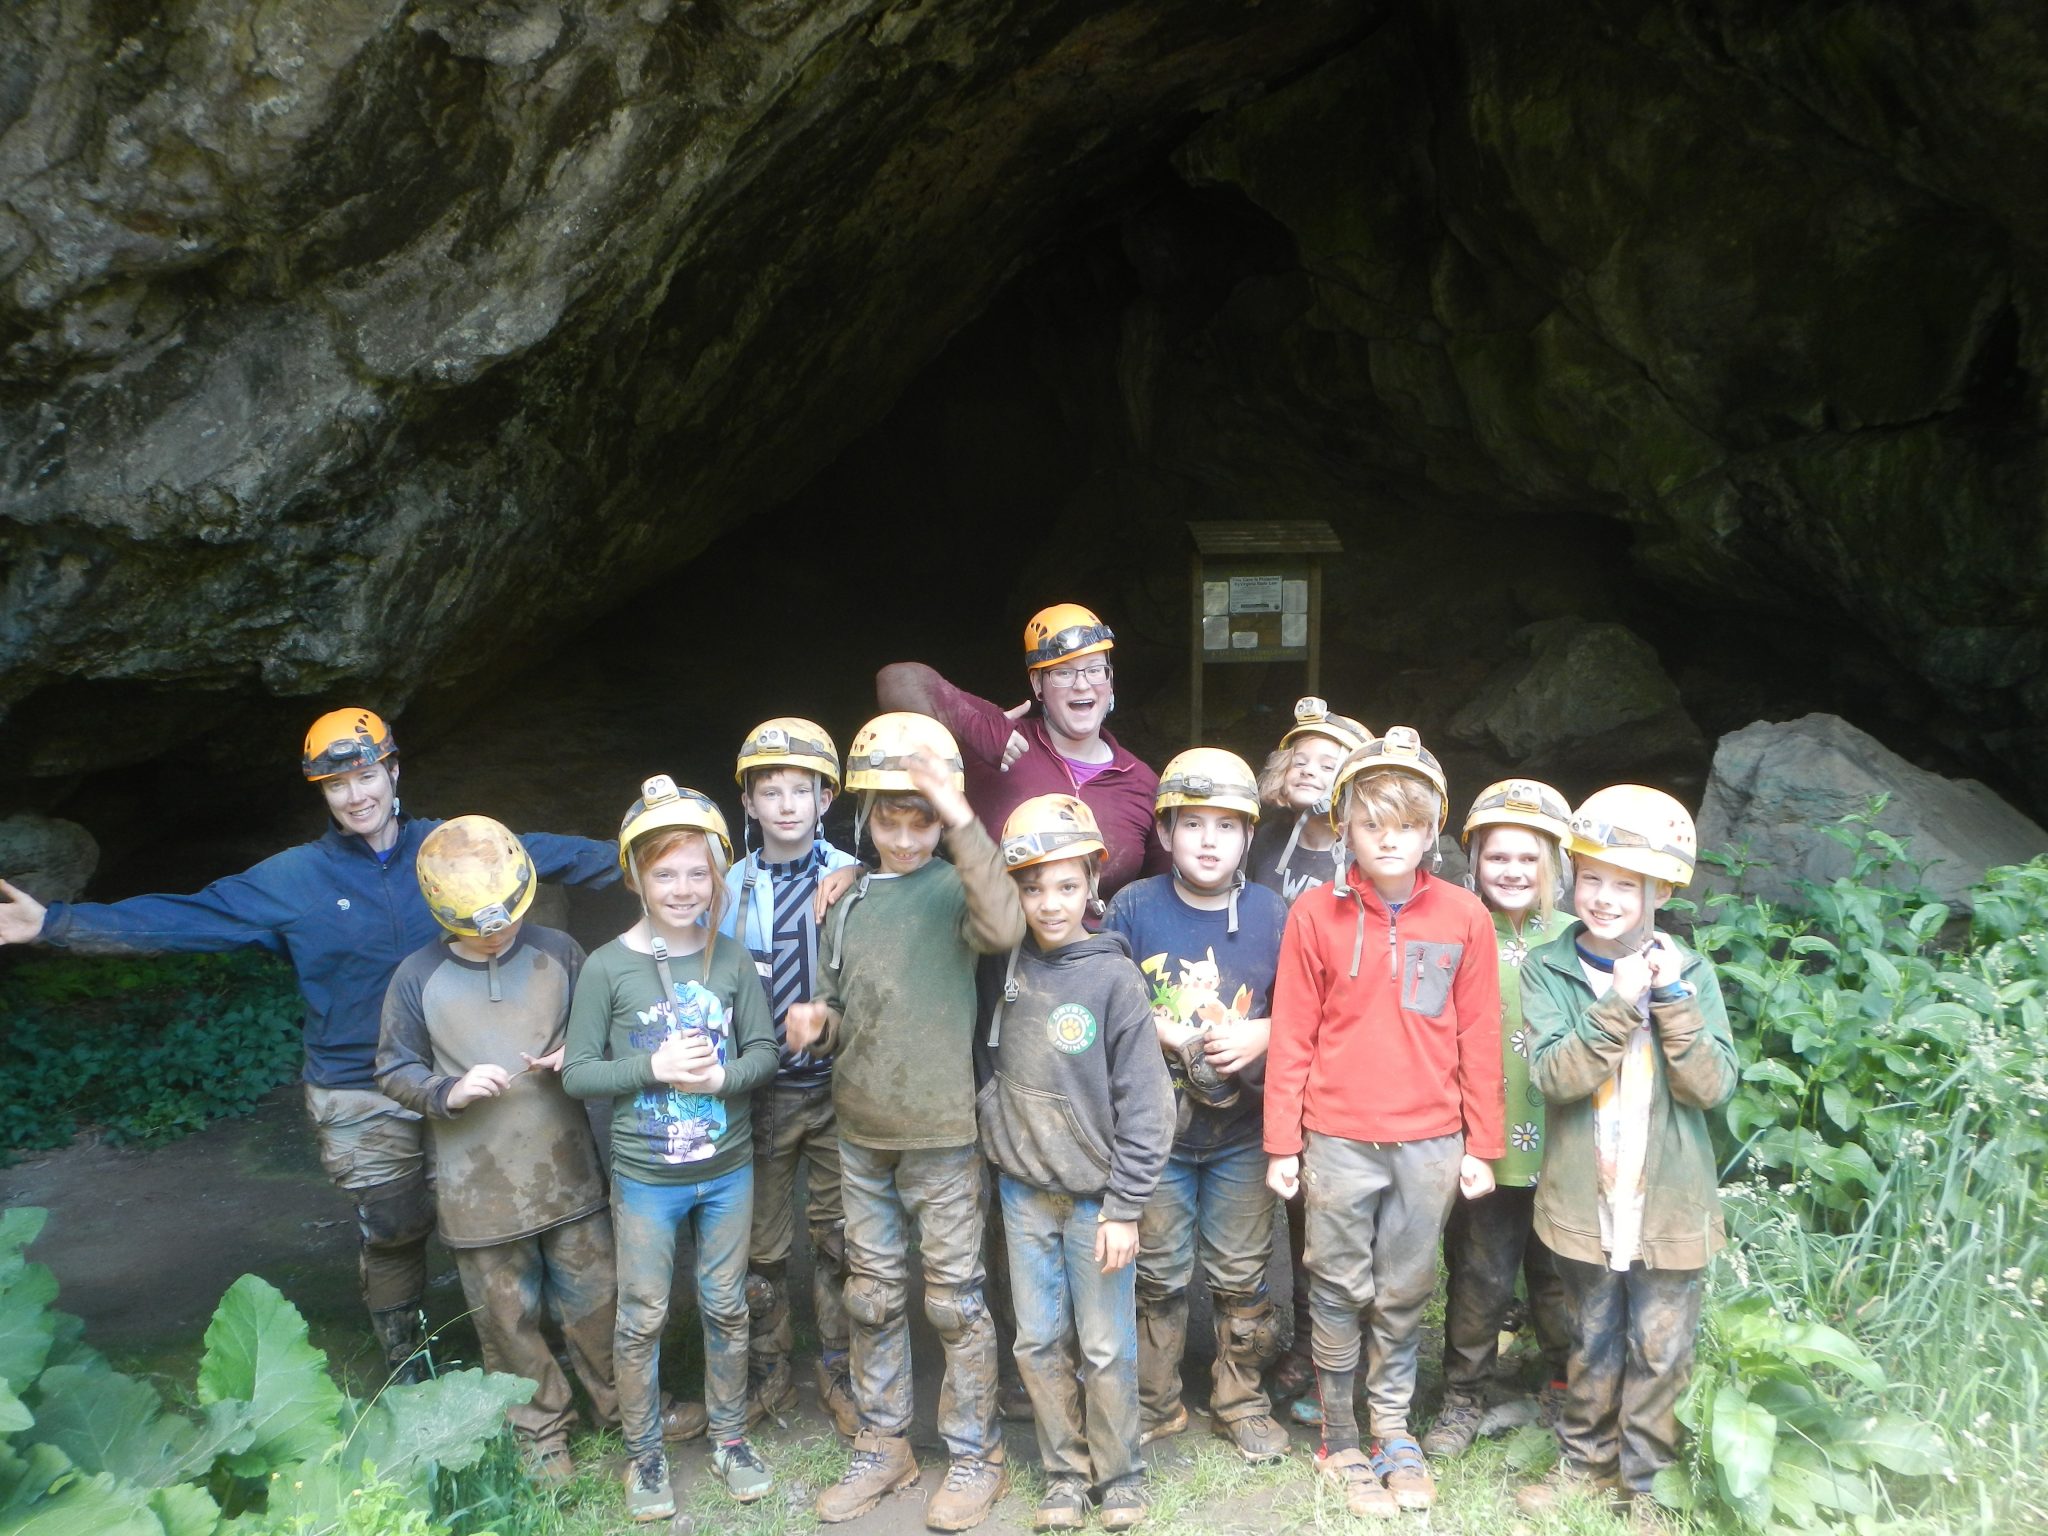 Muddy kids smiling after caving